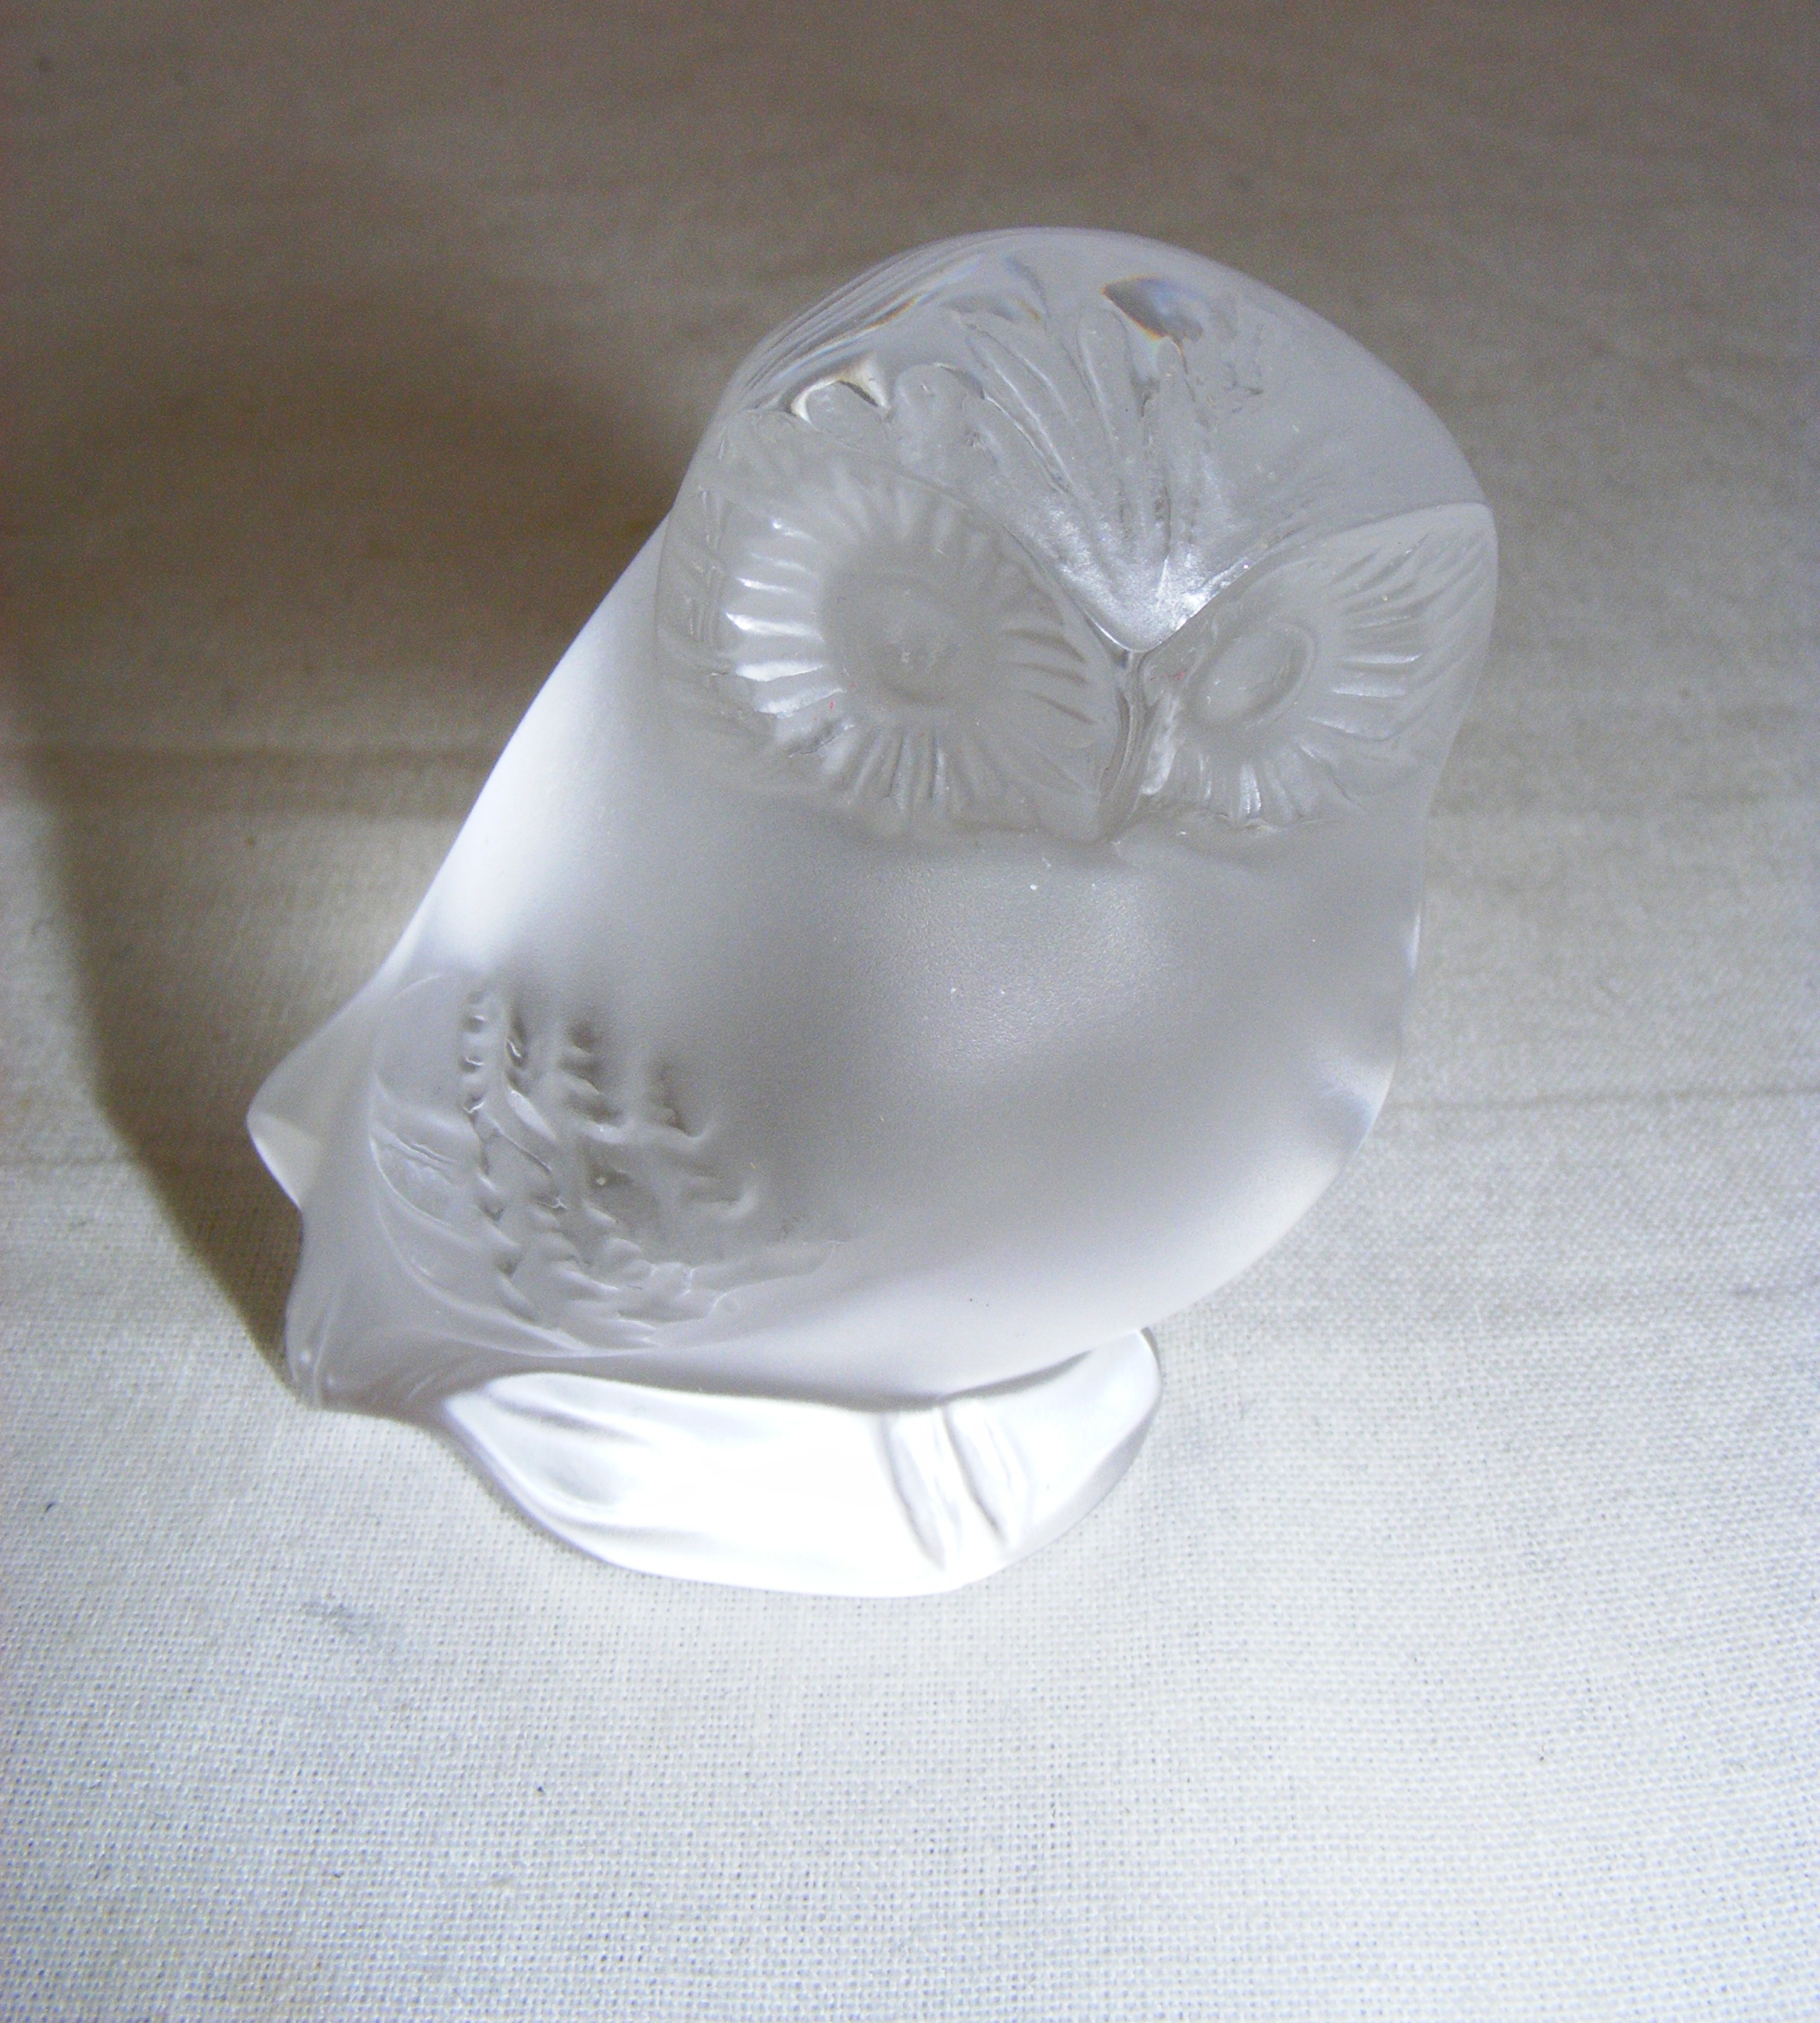 A Lalique frosted glass figurine of an owl, measuring 6cm tall, signed to the base.